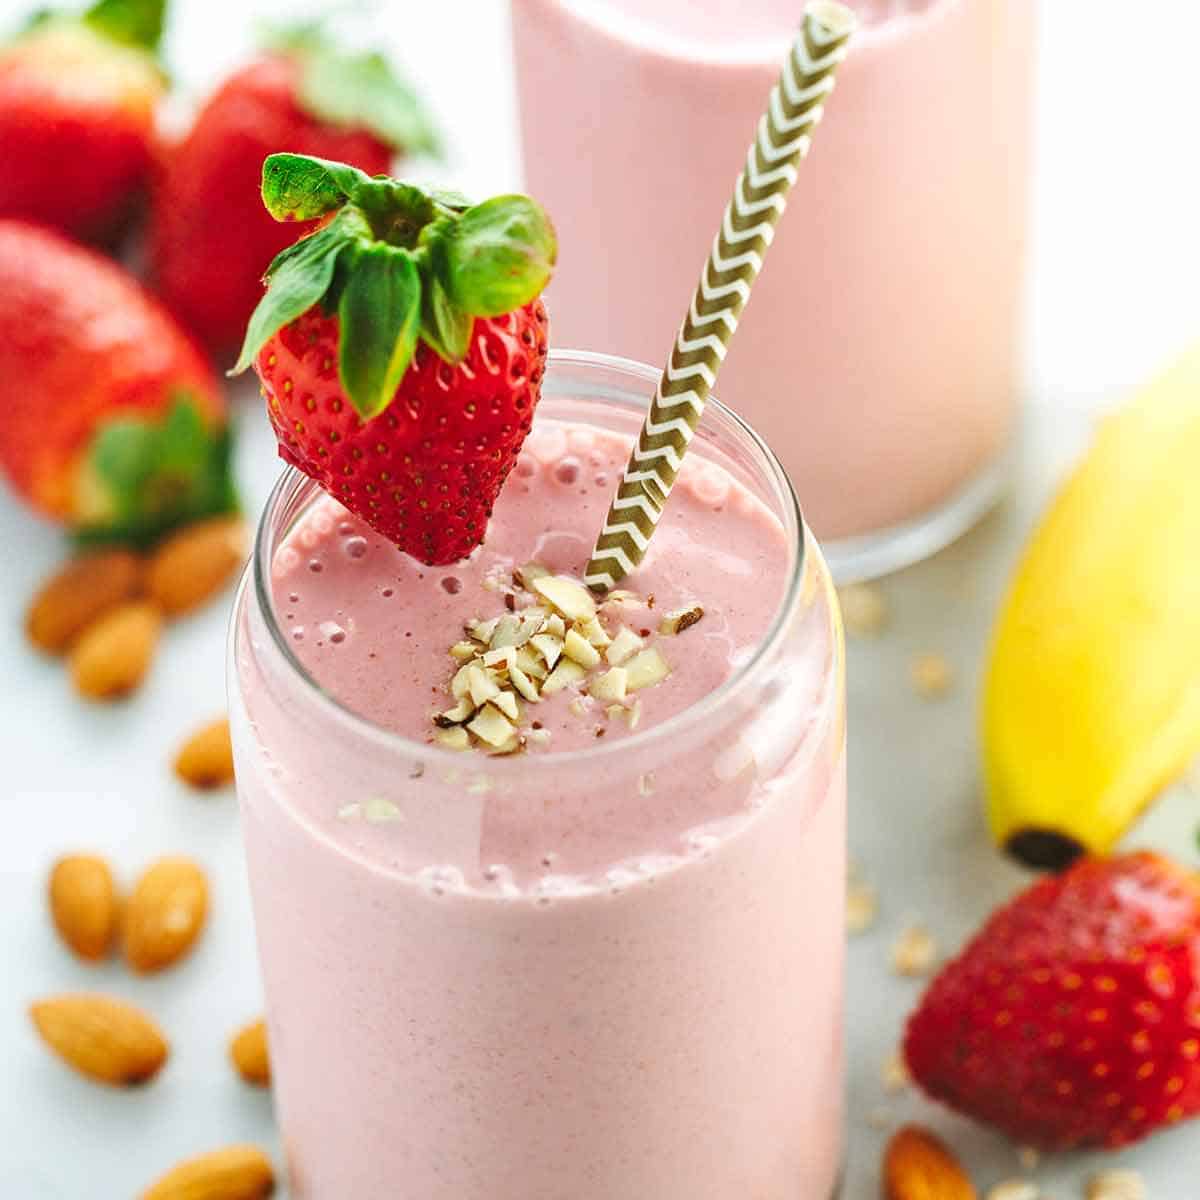 Strawberry and almond breakfast smoothie